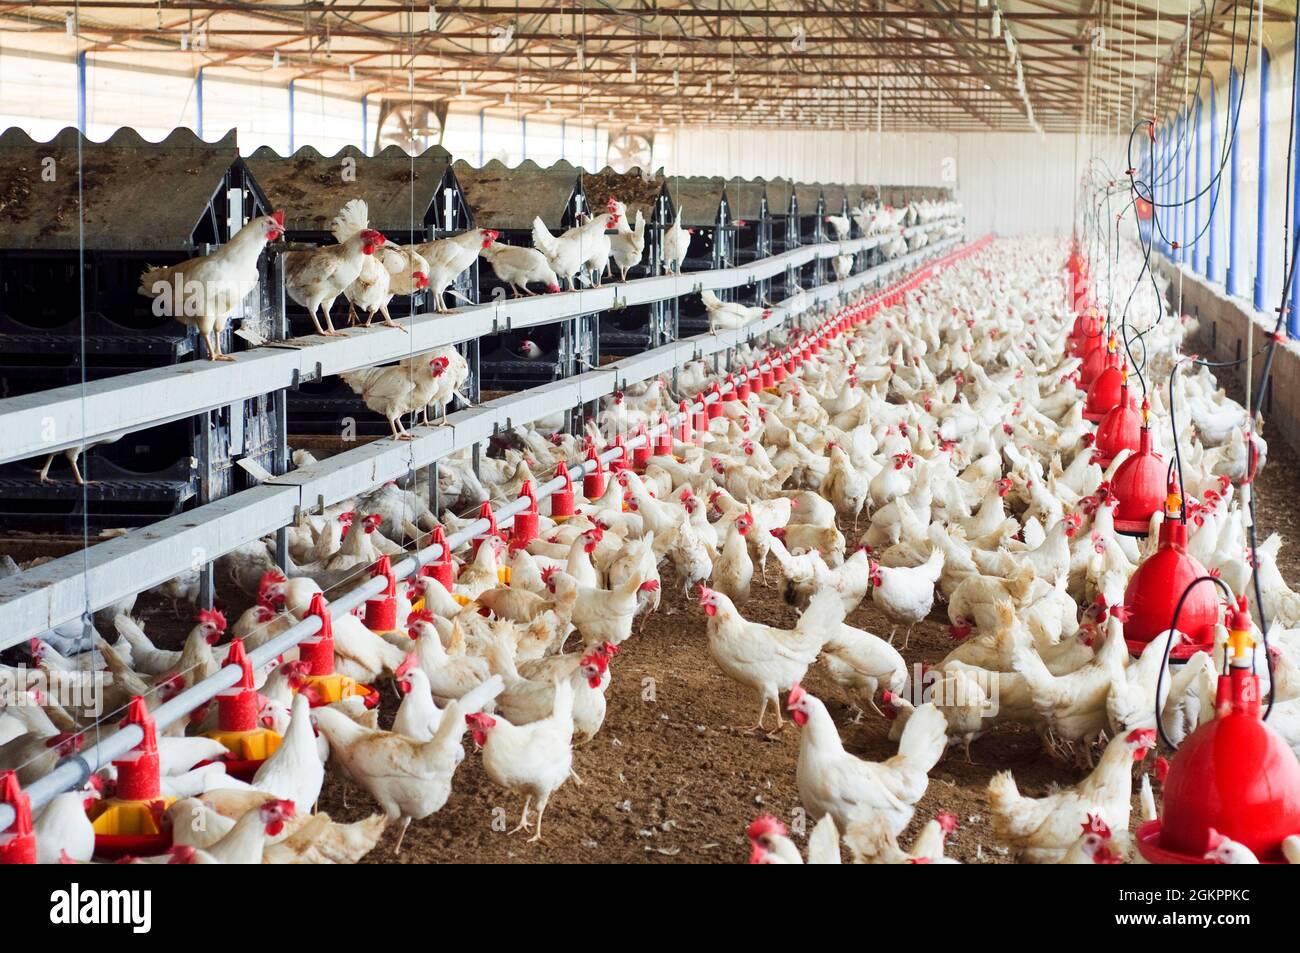 Israel, Hens in an organic, free roaming, chicken coop a producer of 'Freedom Eggs' Stock Photo